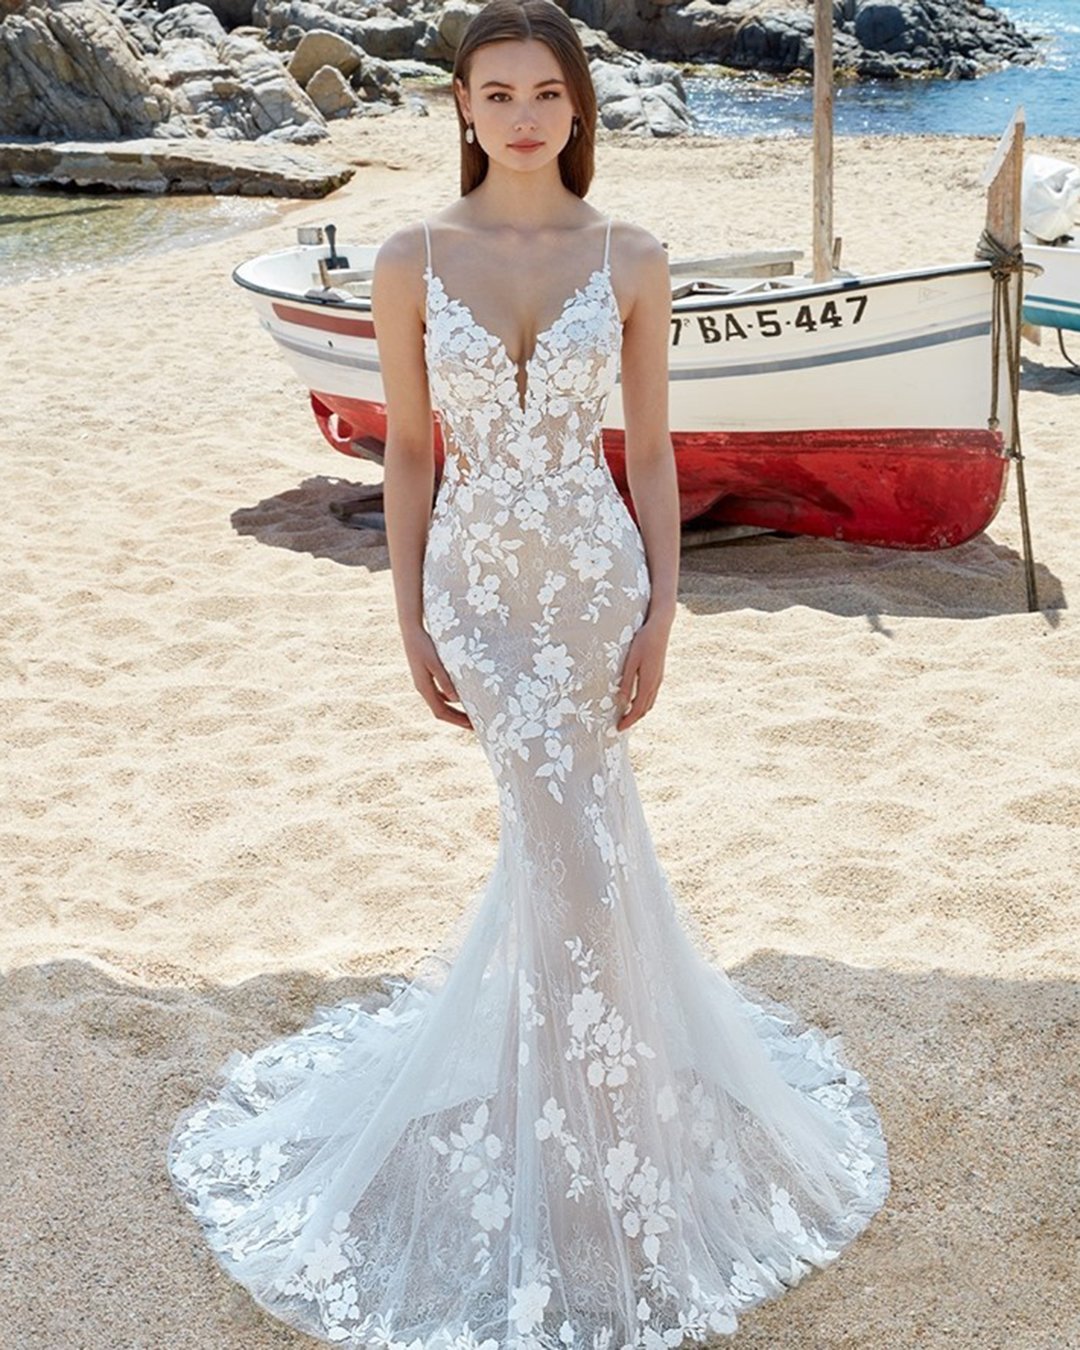 sweetheart neckline wedding dress mermaid with spaghetti straps floral lace enzoani